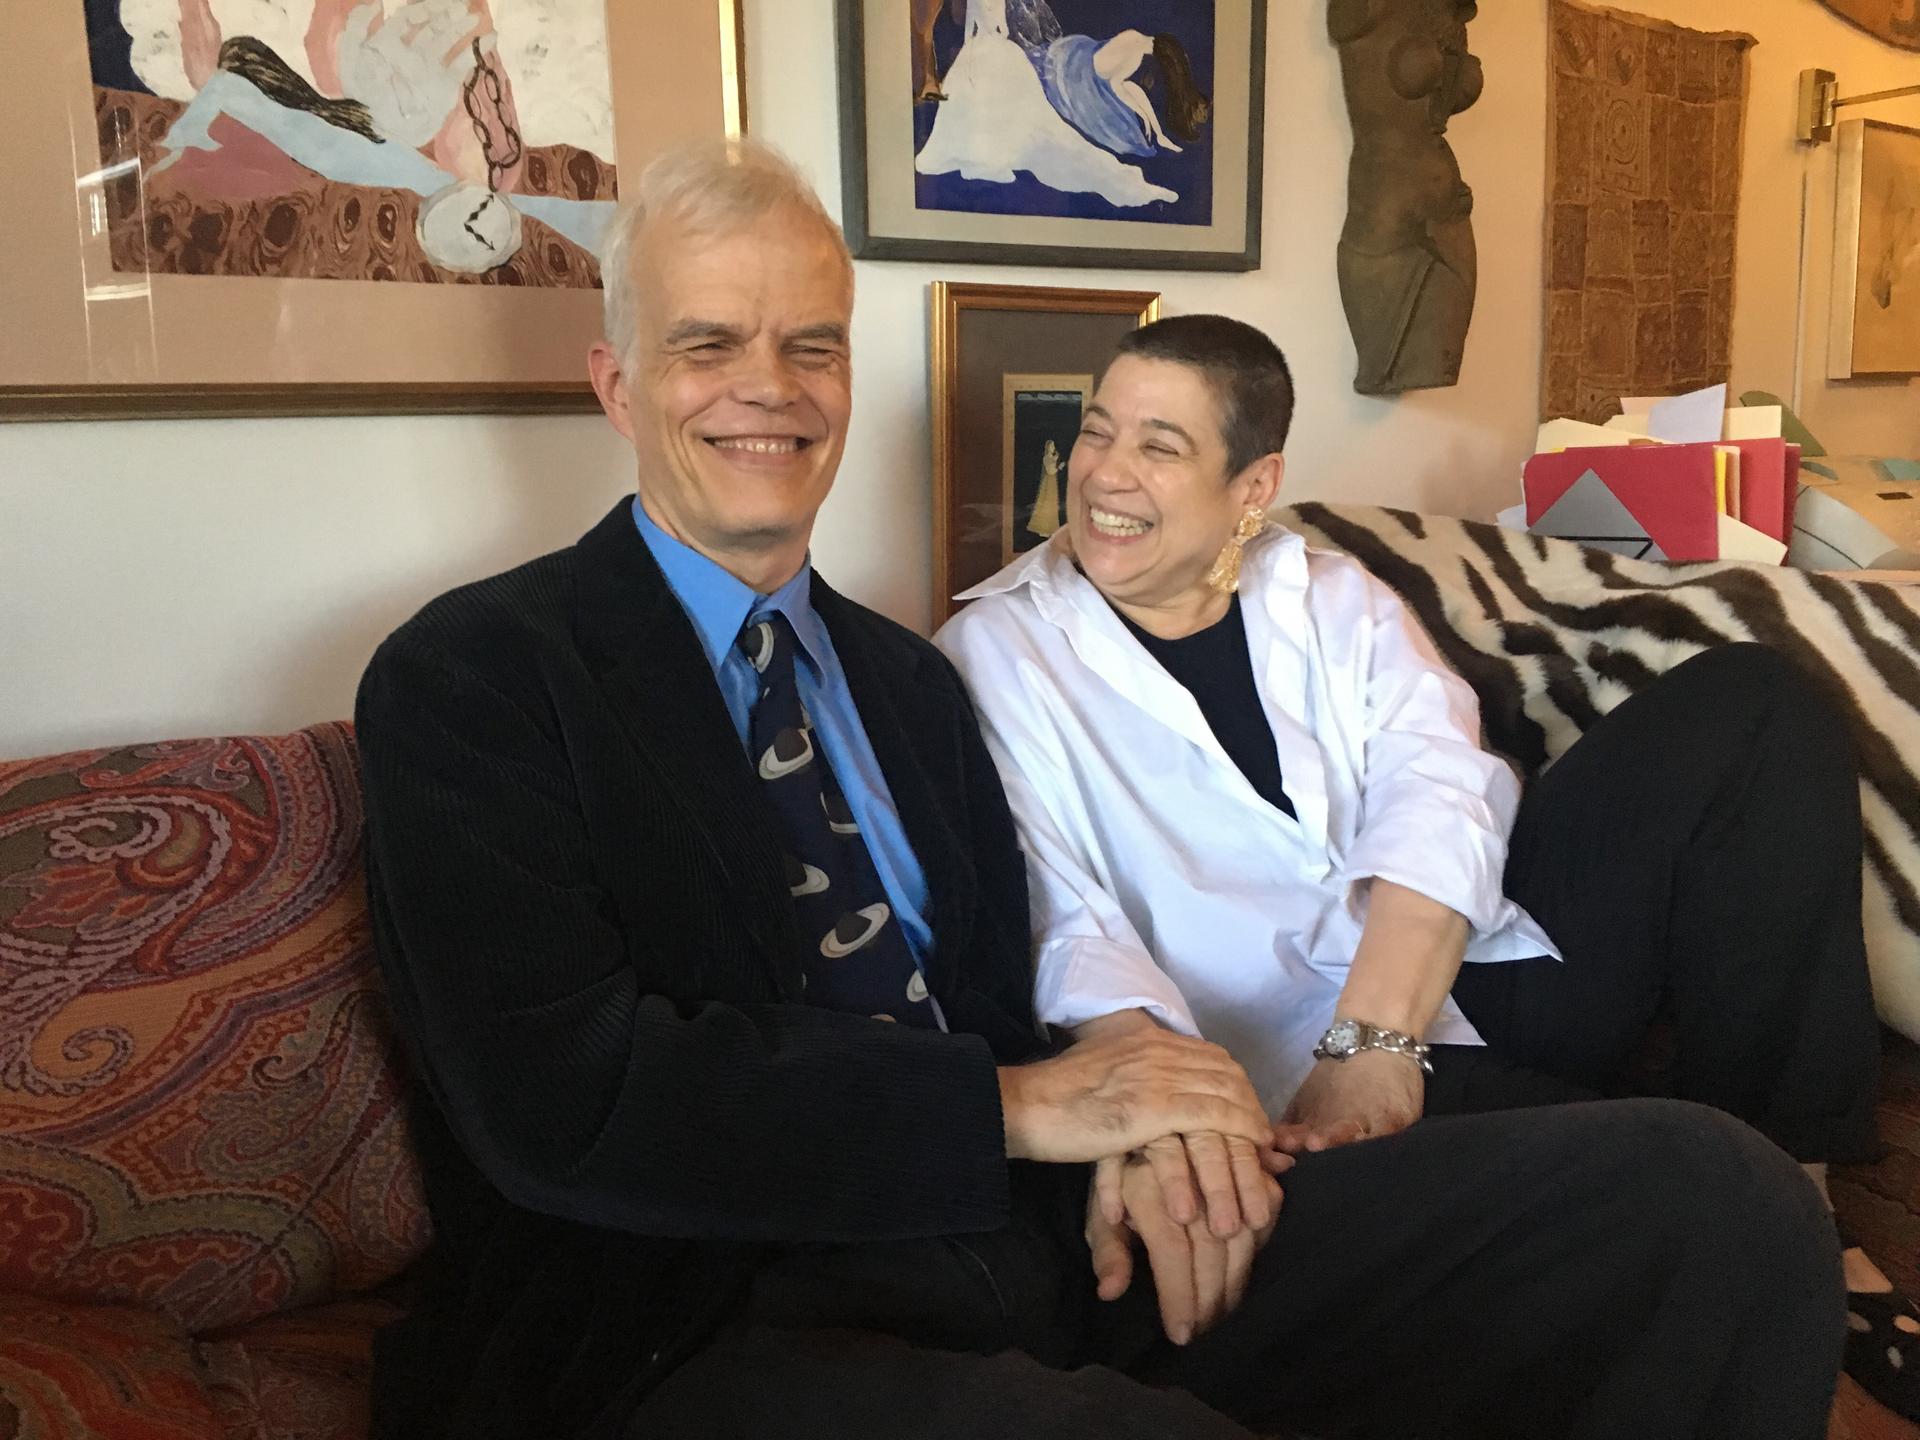 Jeanne Safer and Richard Brookhiser are happily married despite decades of political difference.